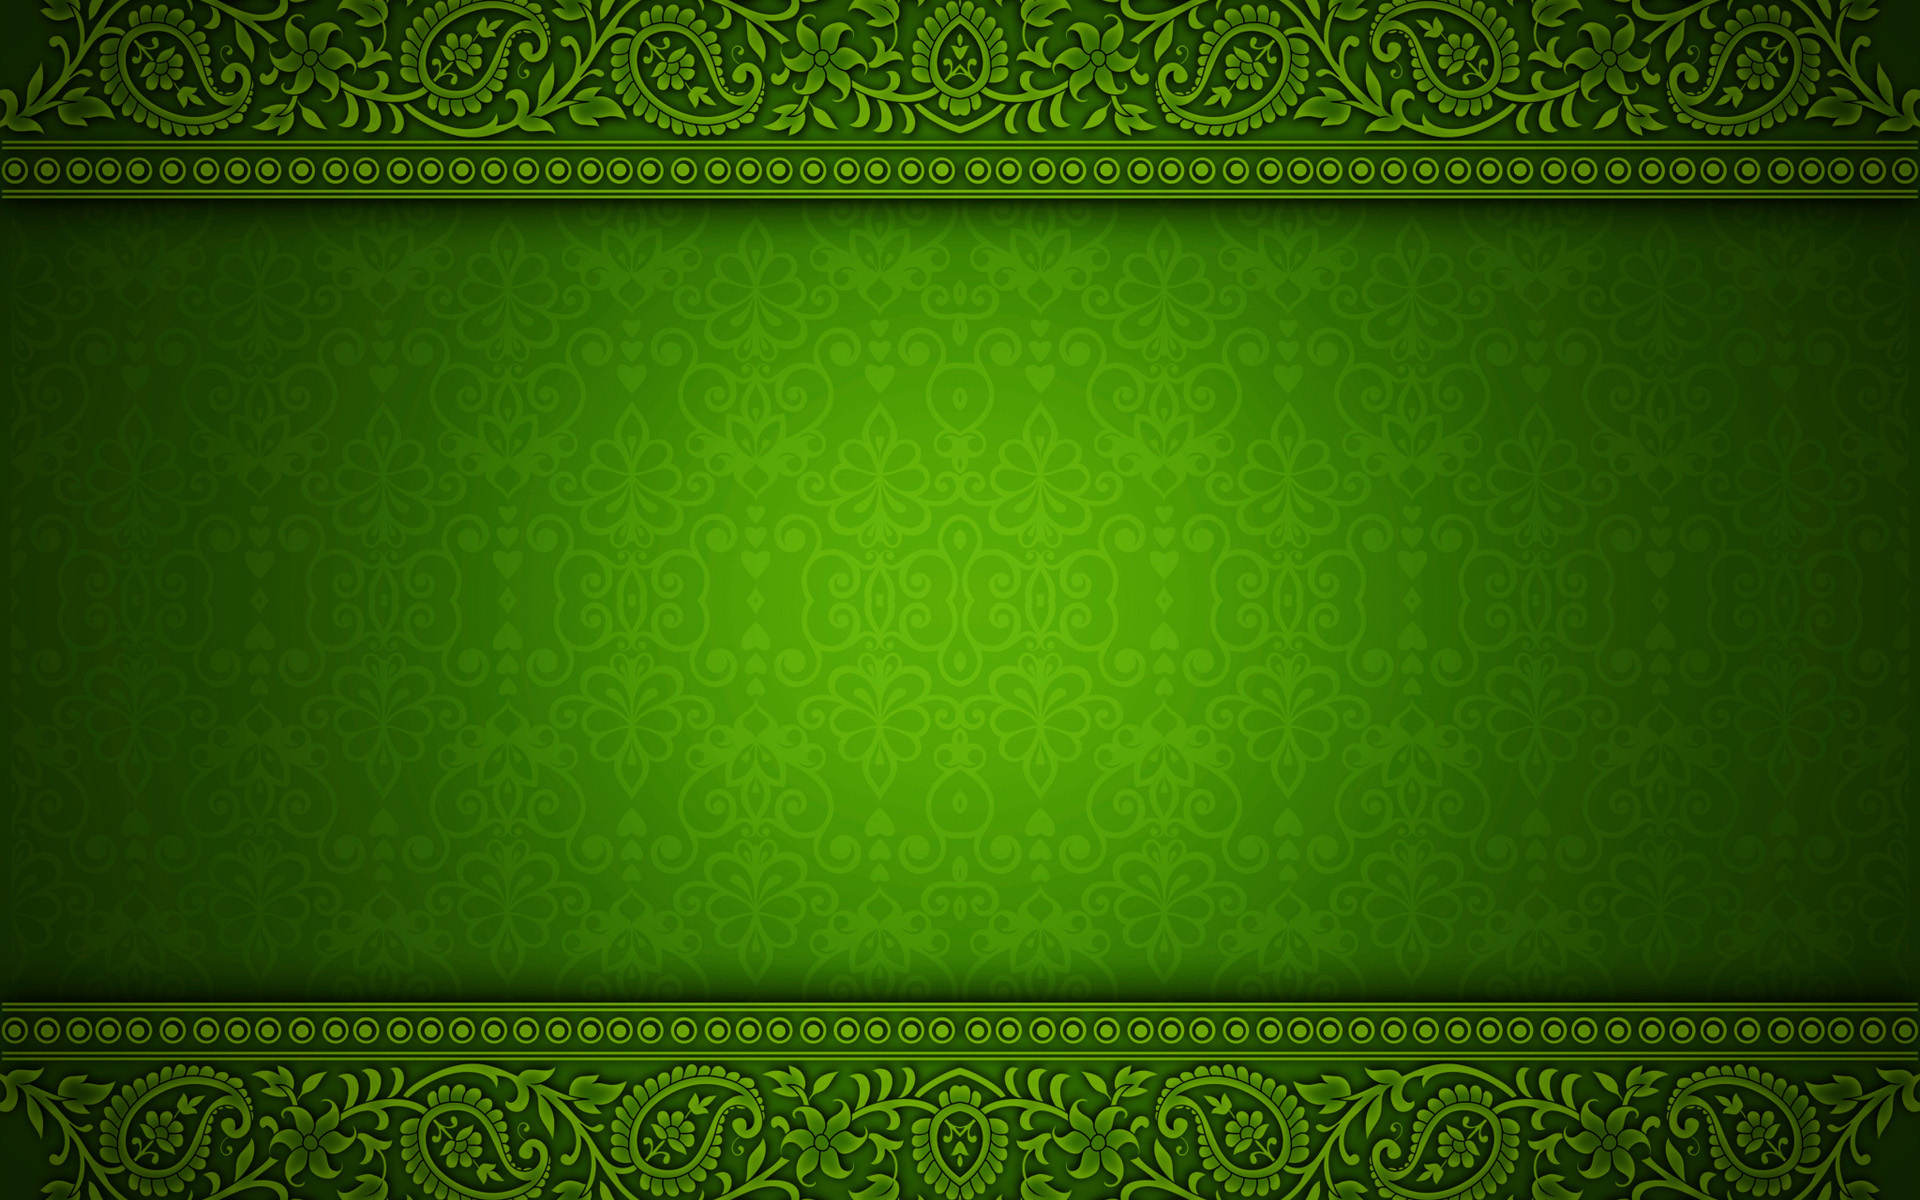 Download wallpaper green floral pattern, green vintage background, floral patterns, vintage background, green retro background, floral vintage pattern, green floral background for desktop with resolution 1920x1200. High Quality HD picture wallpaper